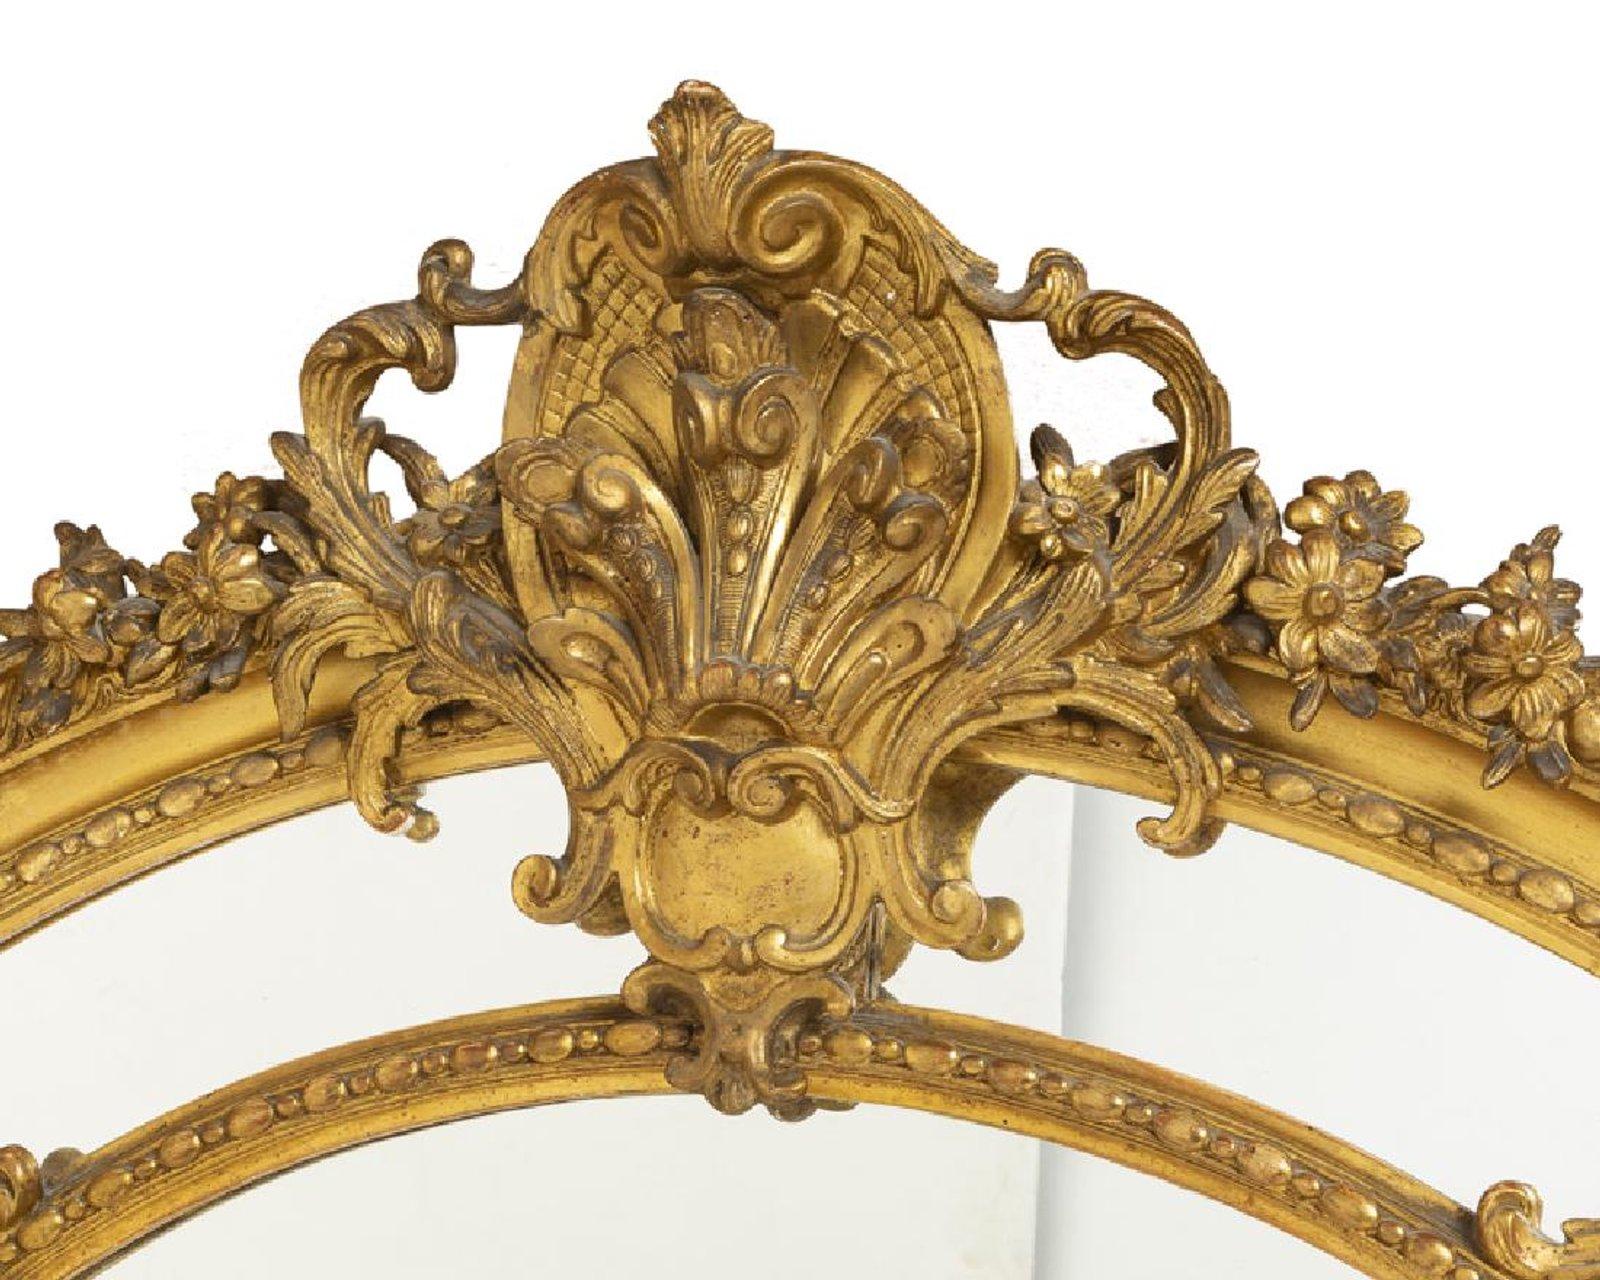 Exceptional 19th century French Regence style gilded figural mirror with beveled glass plate.

The magnificently carved foliate-inspired top of the mirror is centered by scrolling acanthus shell and flanked by beautifully carved gilt sculptures of